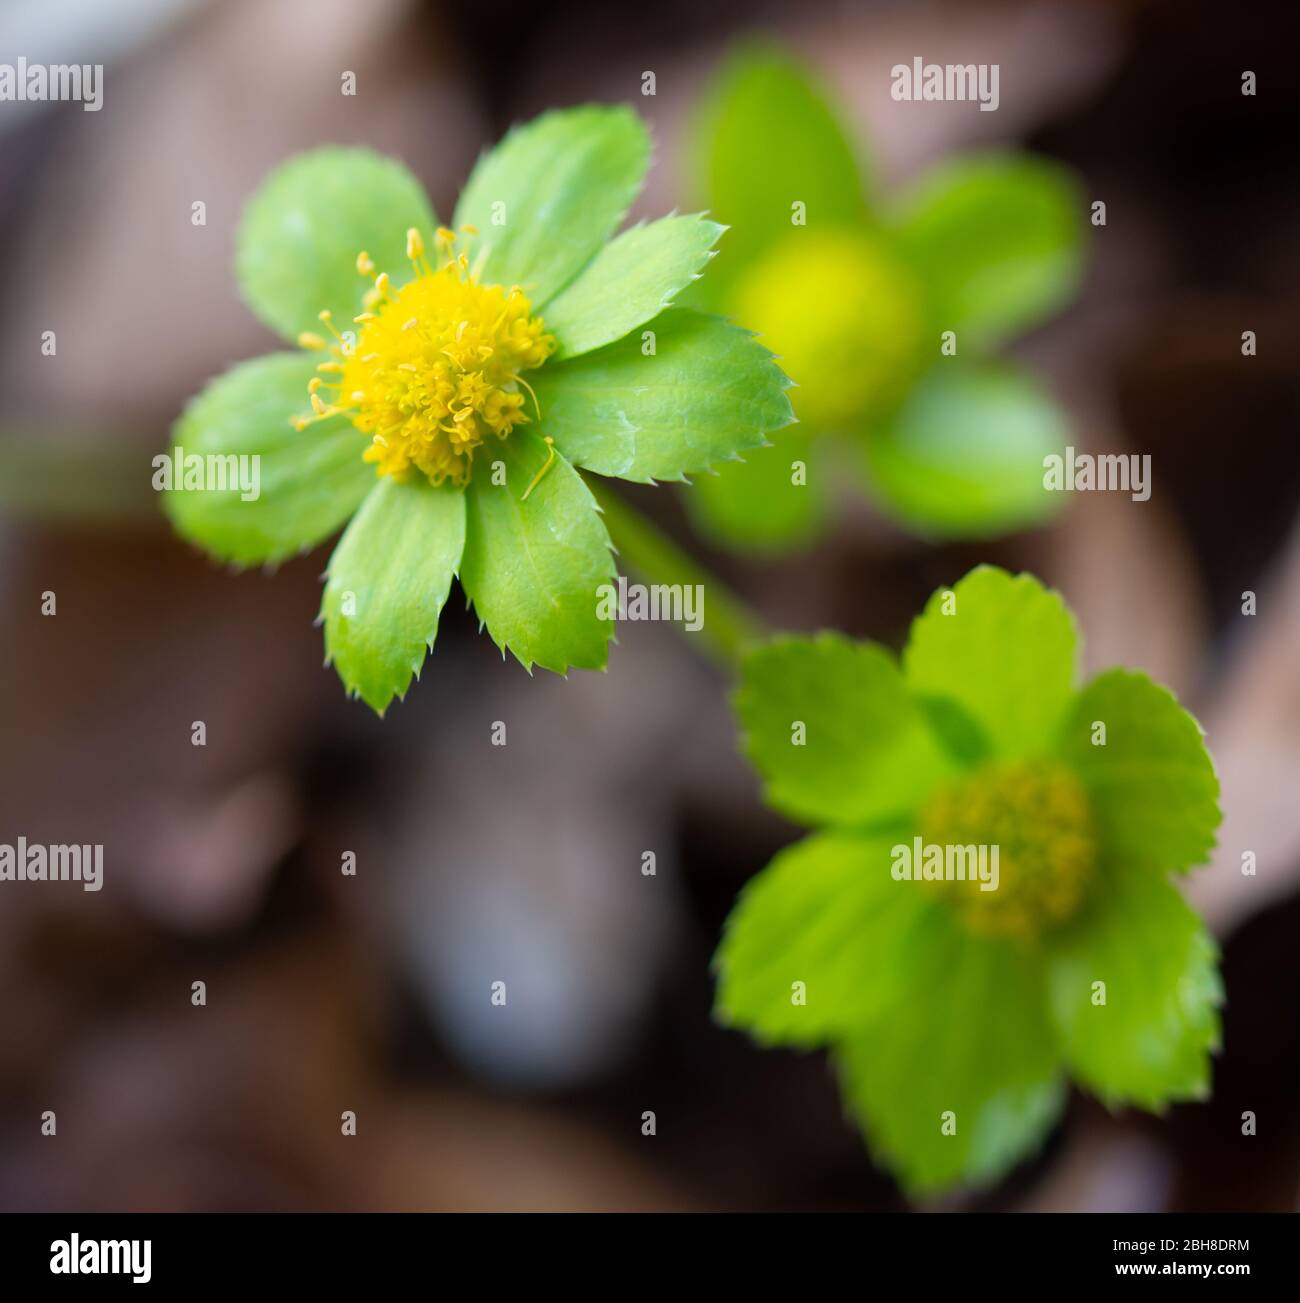 Beautiful close up photo of Hacquetia epipactis. Green flower head with tiny yellow florets. Stock Photo